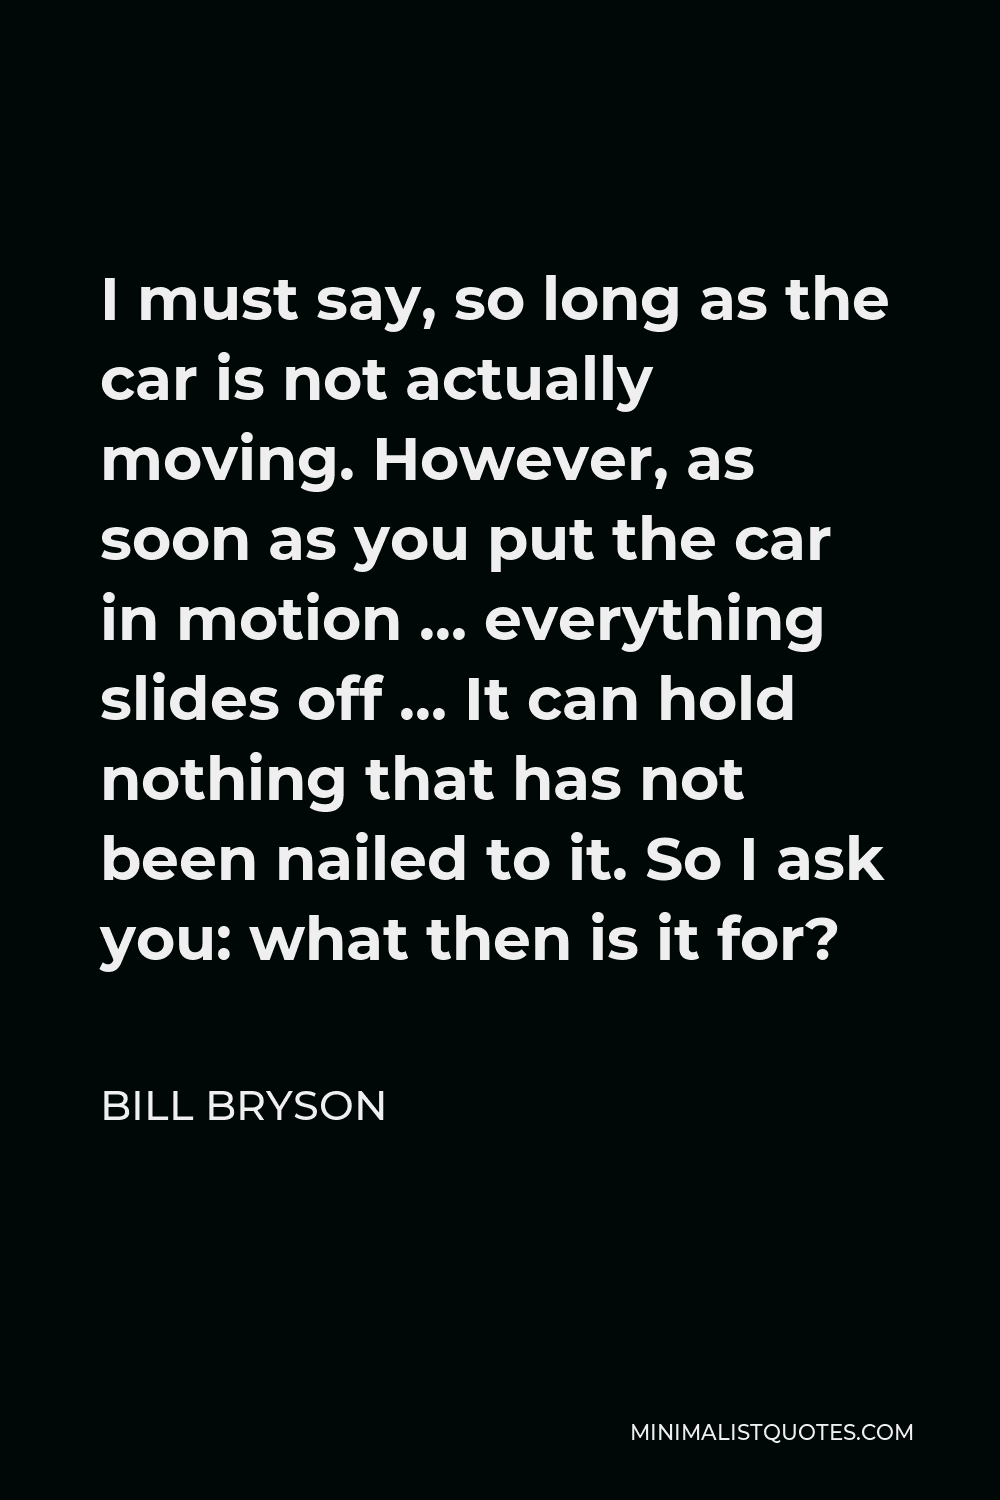 Bill Bryson Quote - I must say, so long as the car is not actually moving. However, as soon as you put the car in motion … everything slides off … It can hold nothing that has not been nailed to it. So I ask you: what then is it for?